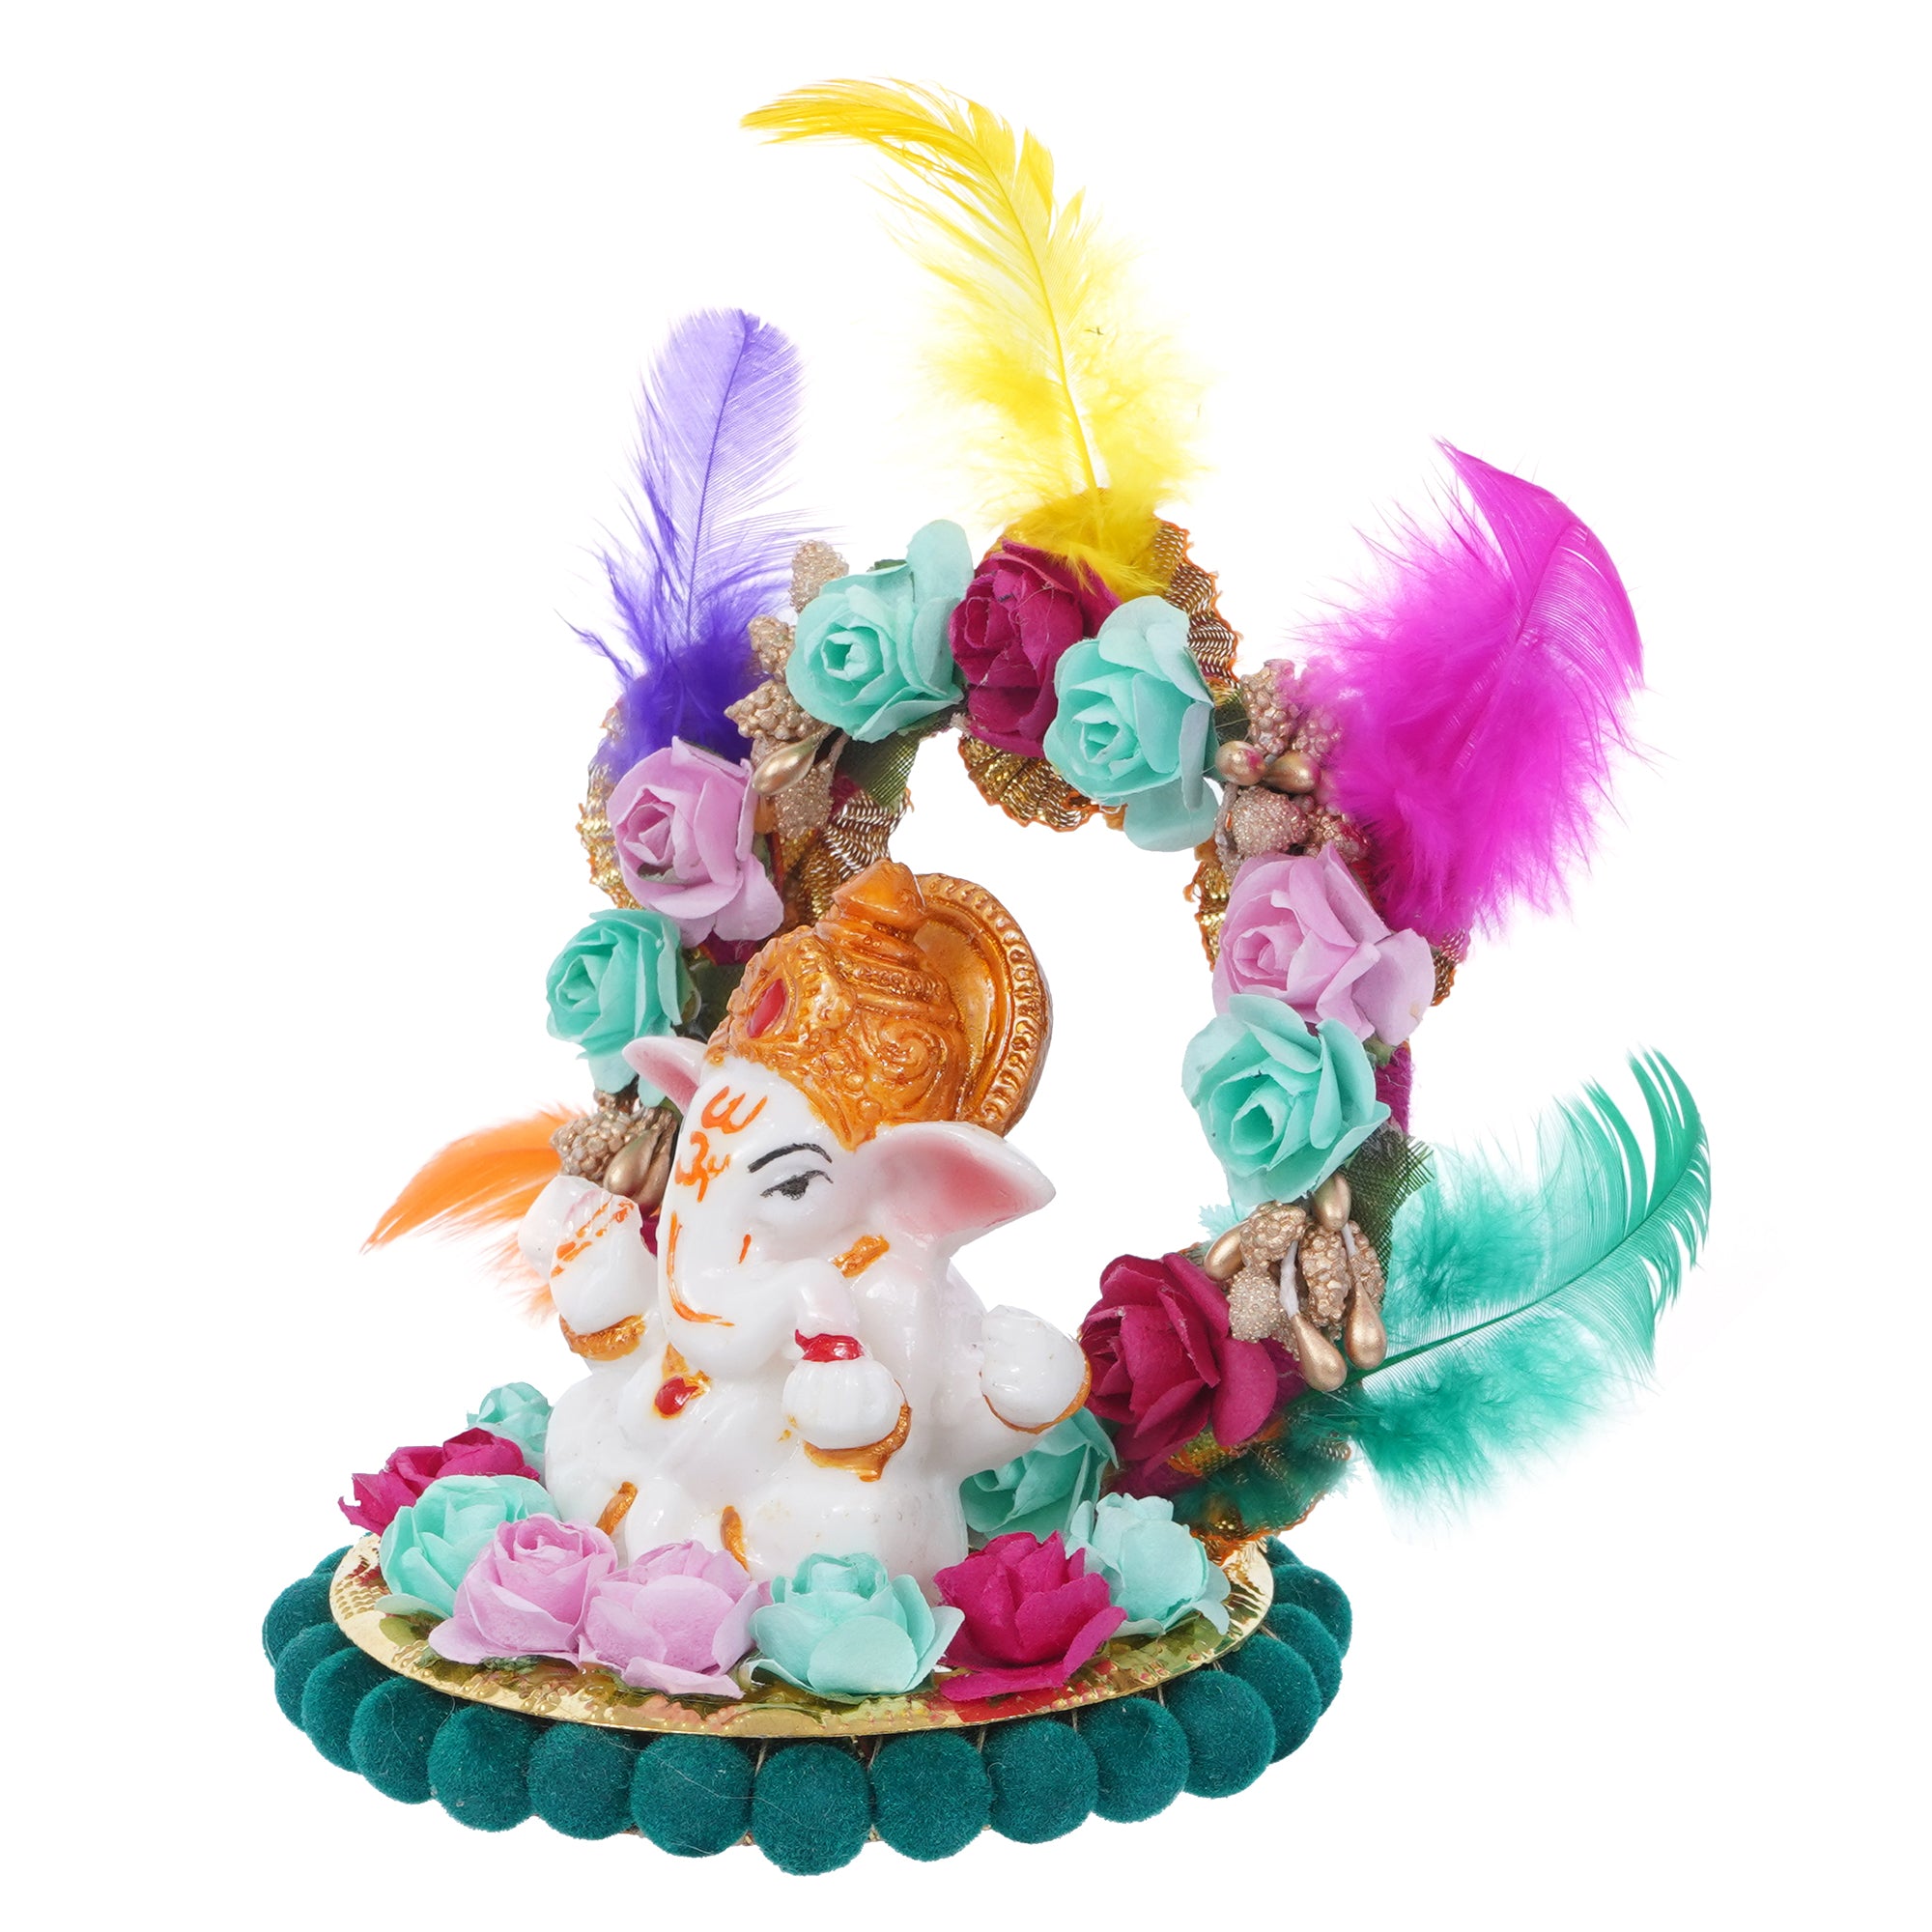 Lord Ganesha Idol On Decorative Handcrafted Plate With Throne Of Colorful Flowers And Feathers 5